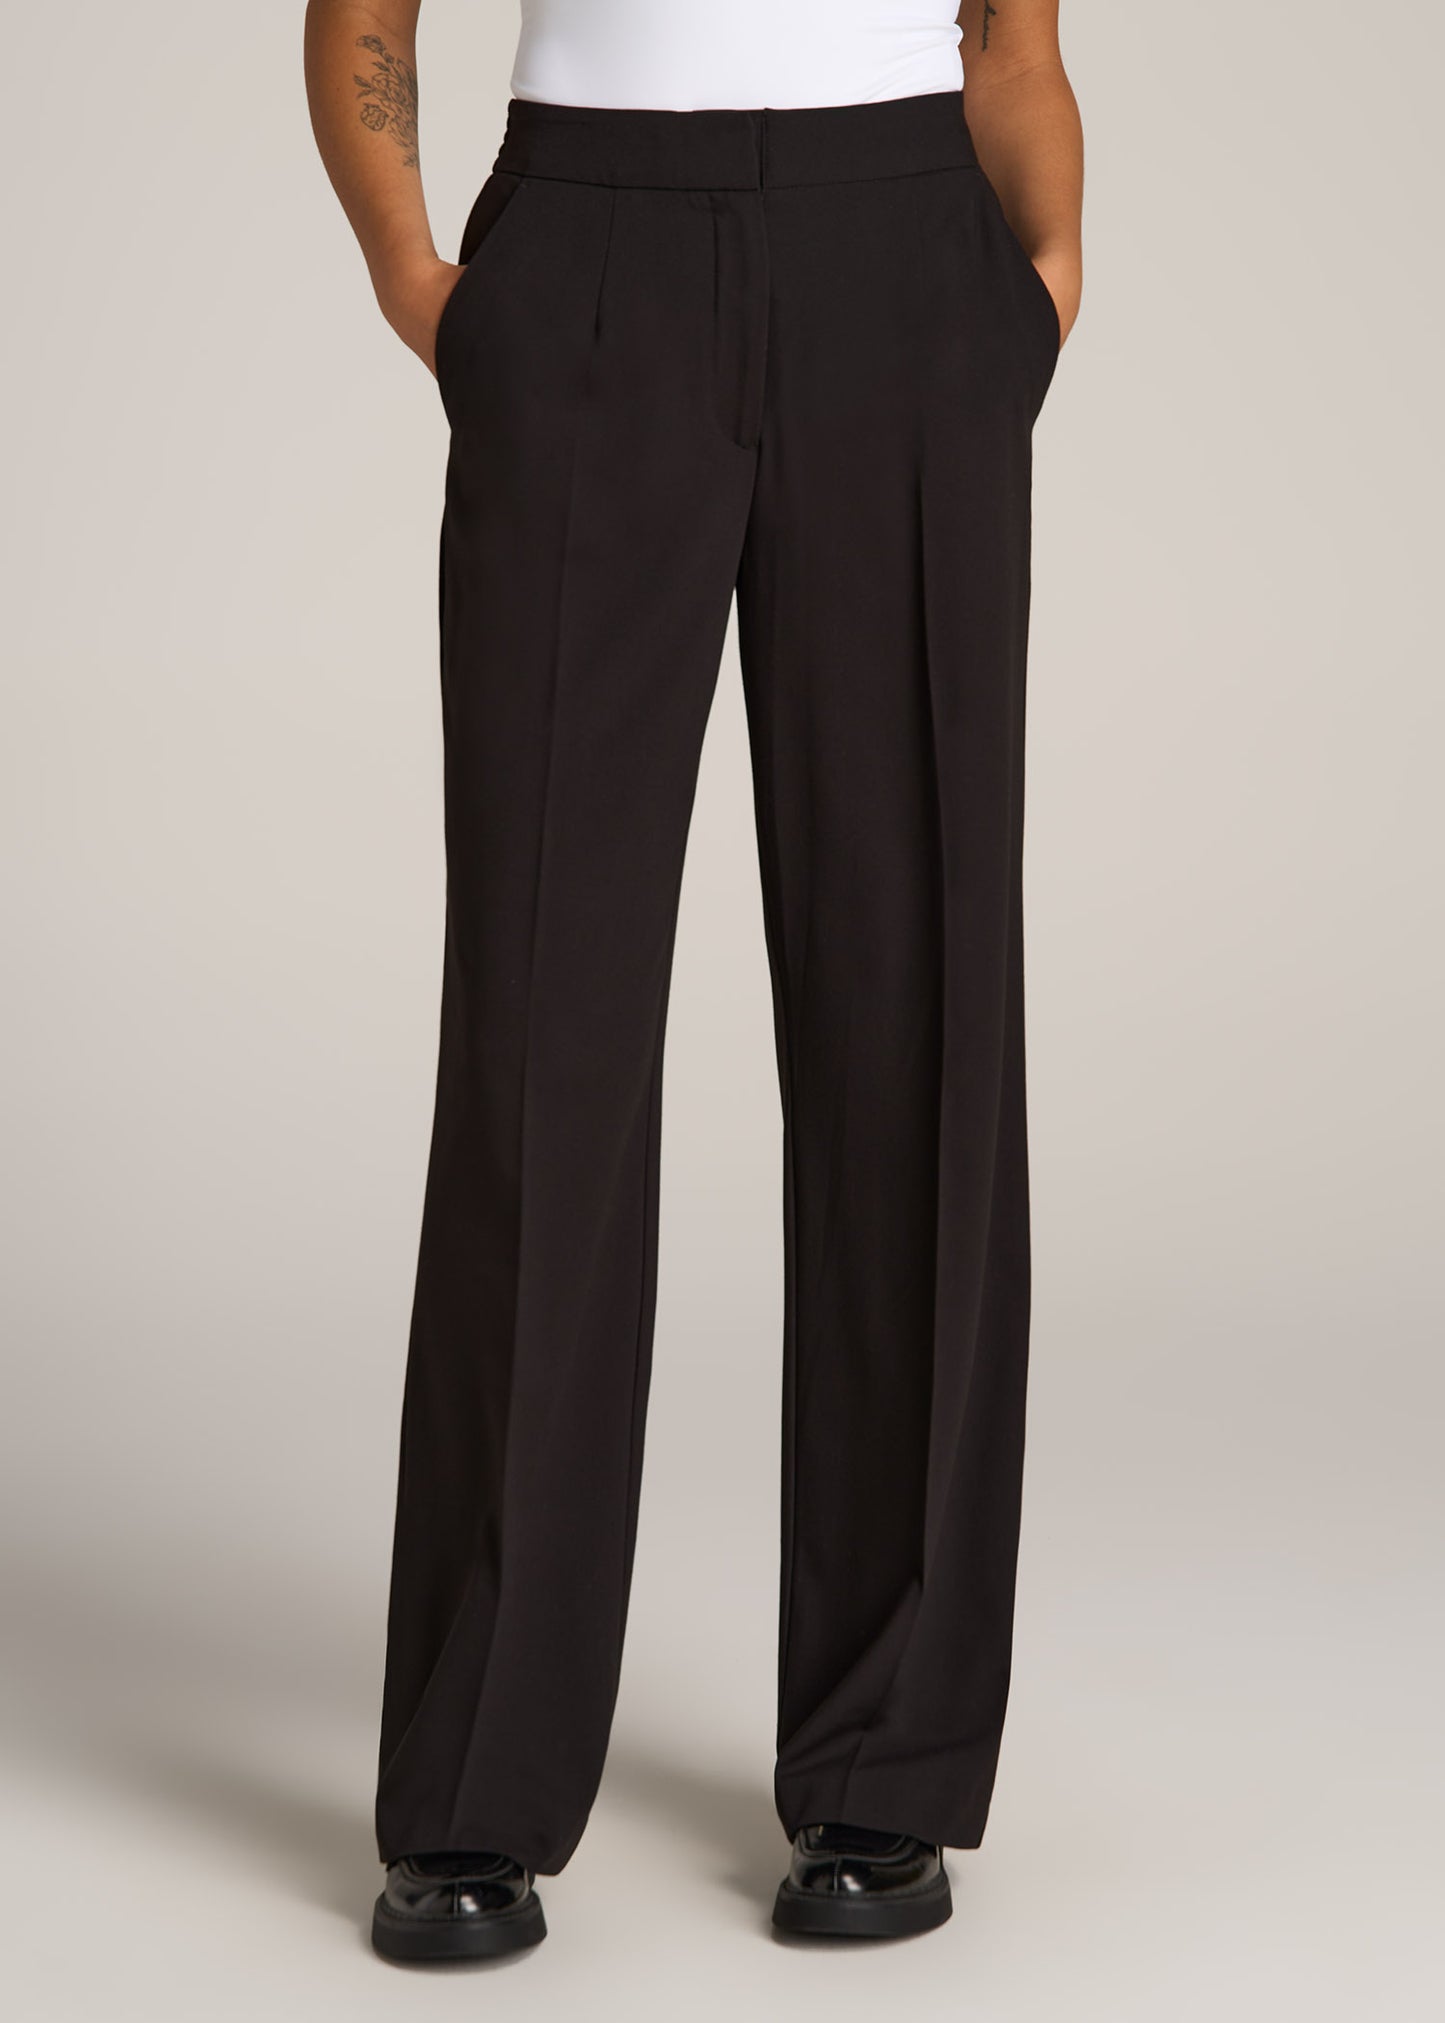 Pleated Dress Pants for Tall Women, American Tall